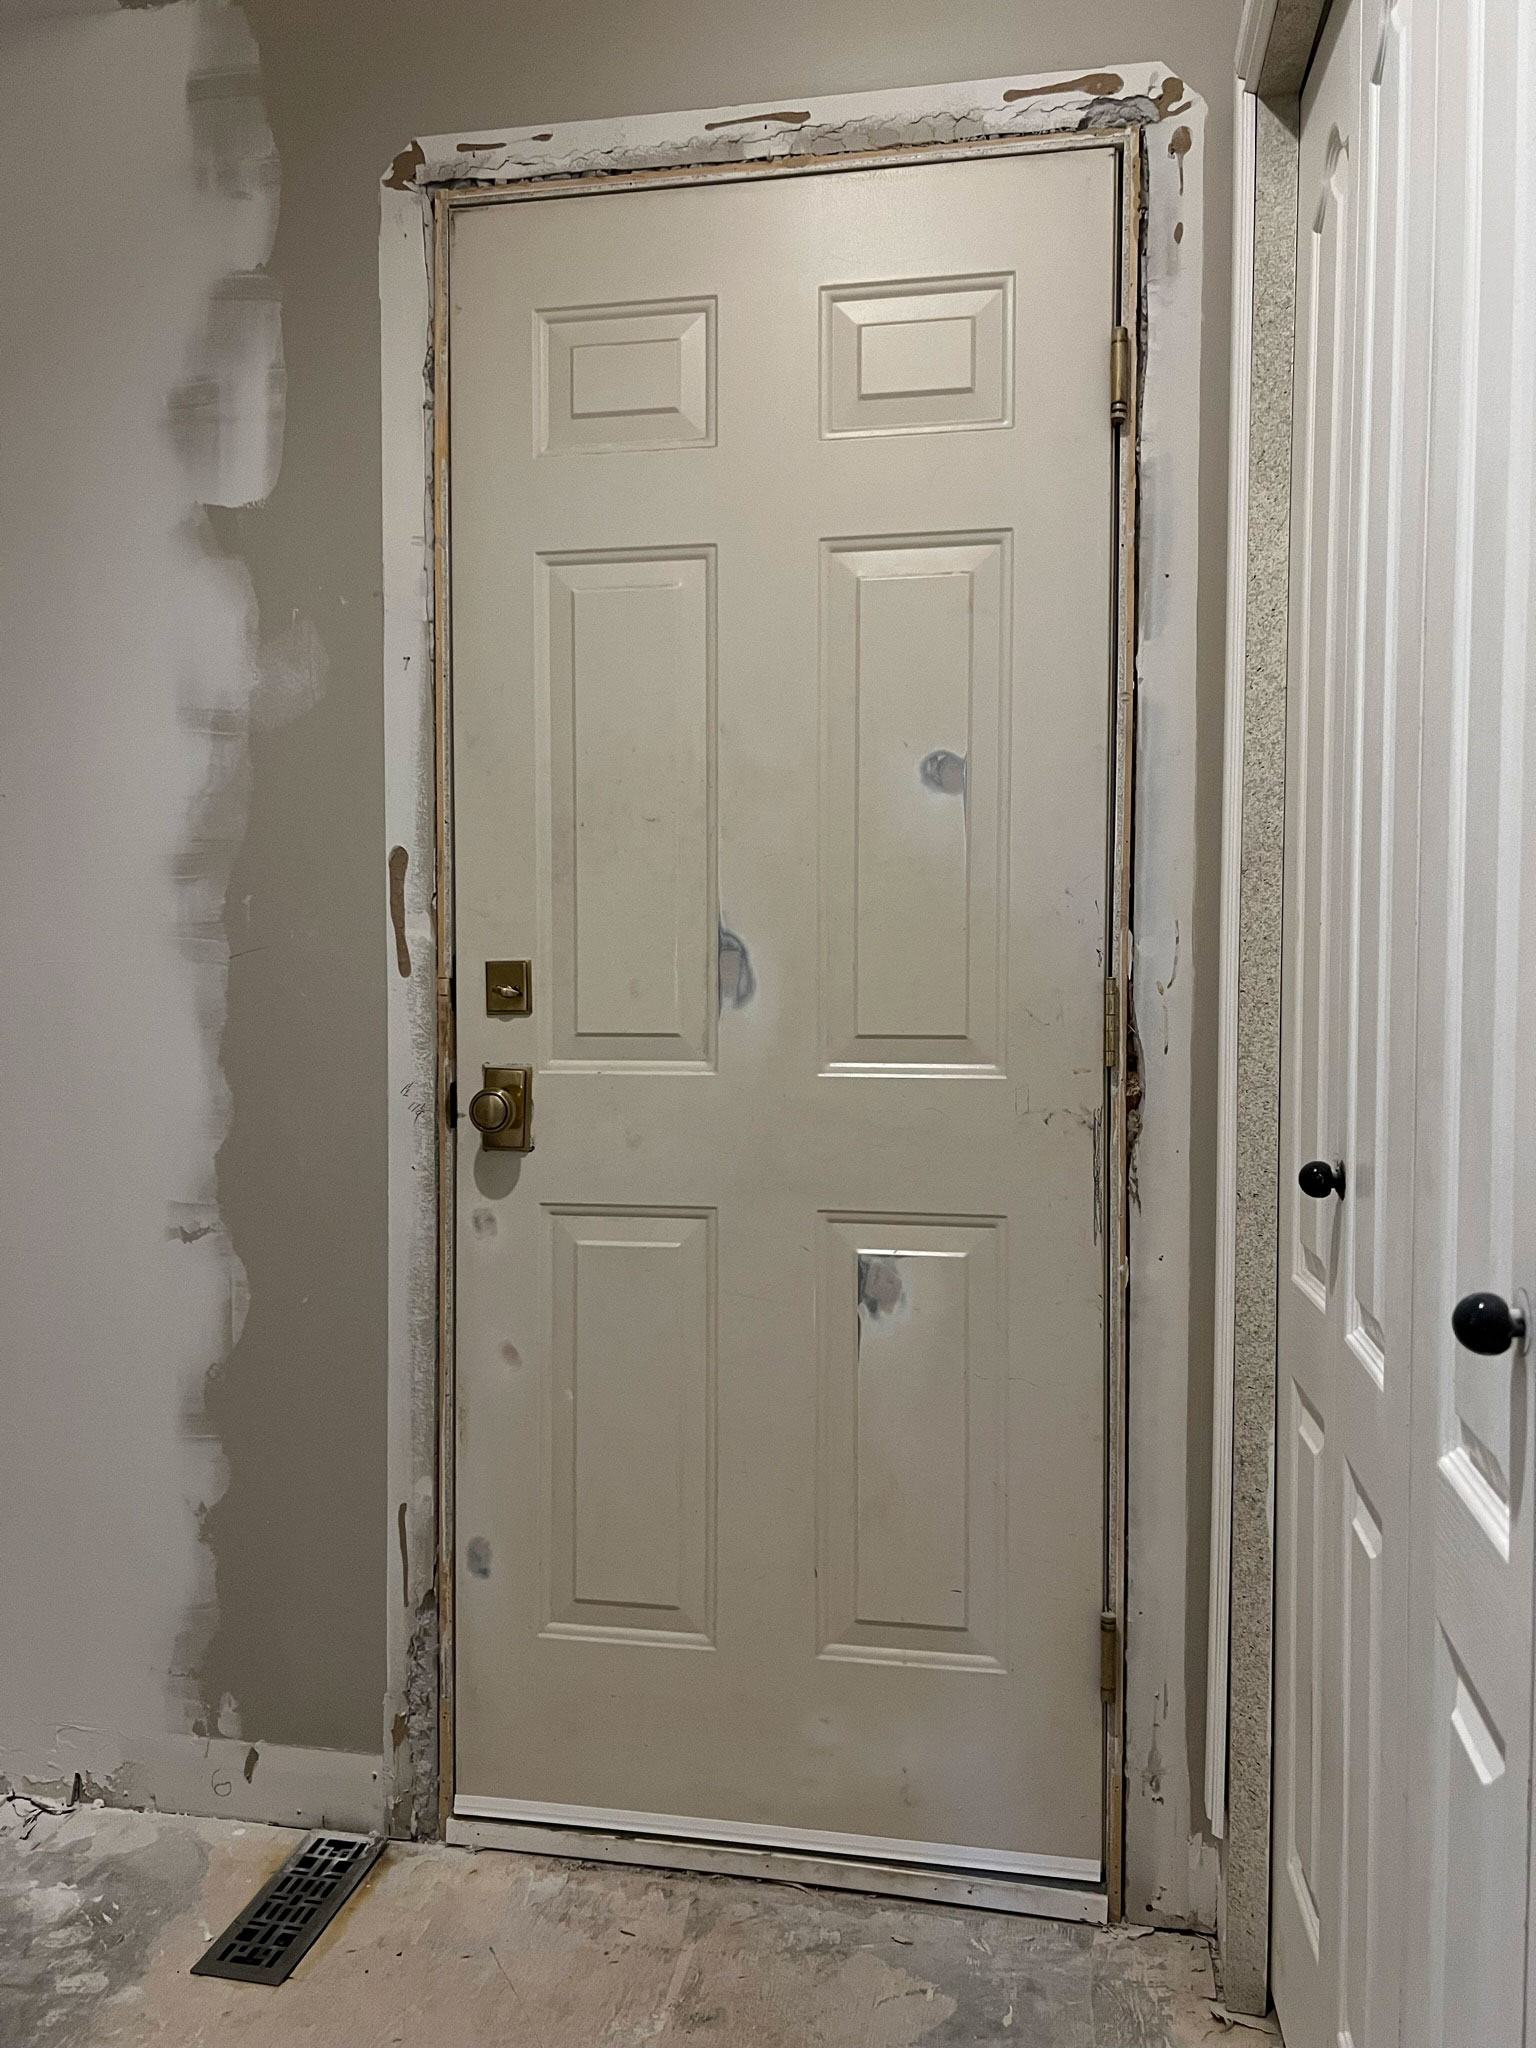 door with patches and no trim and rough drywall, with door opening on the left